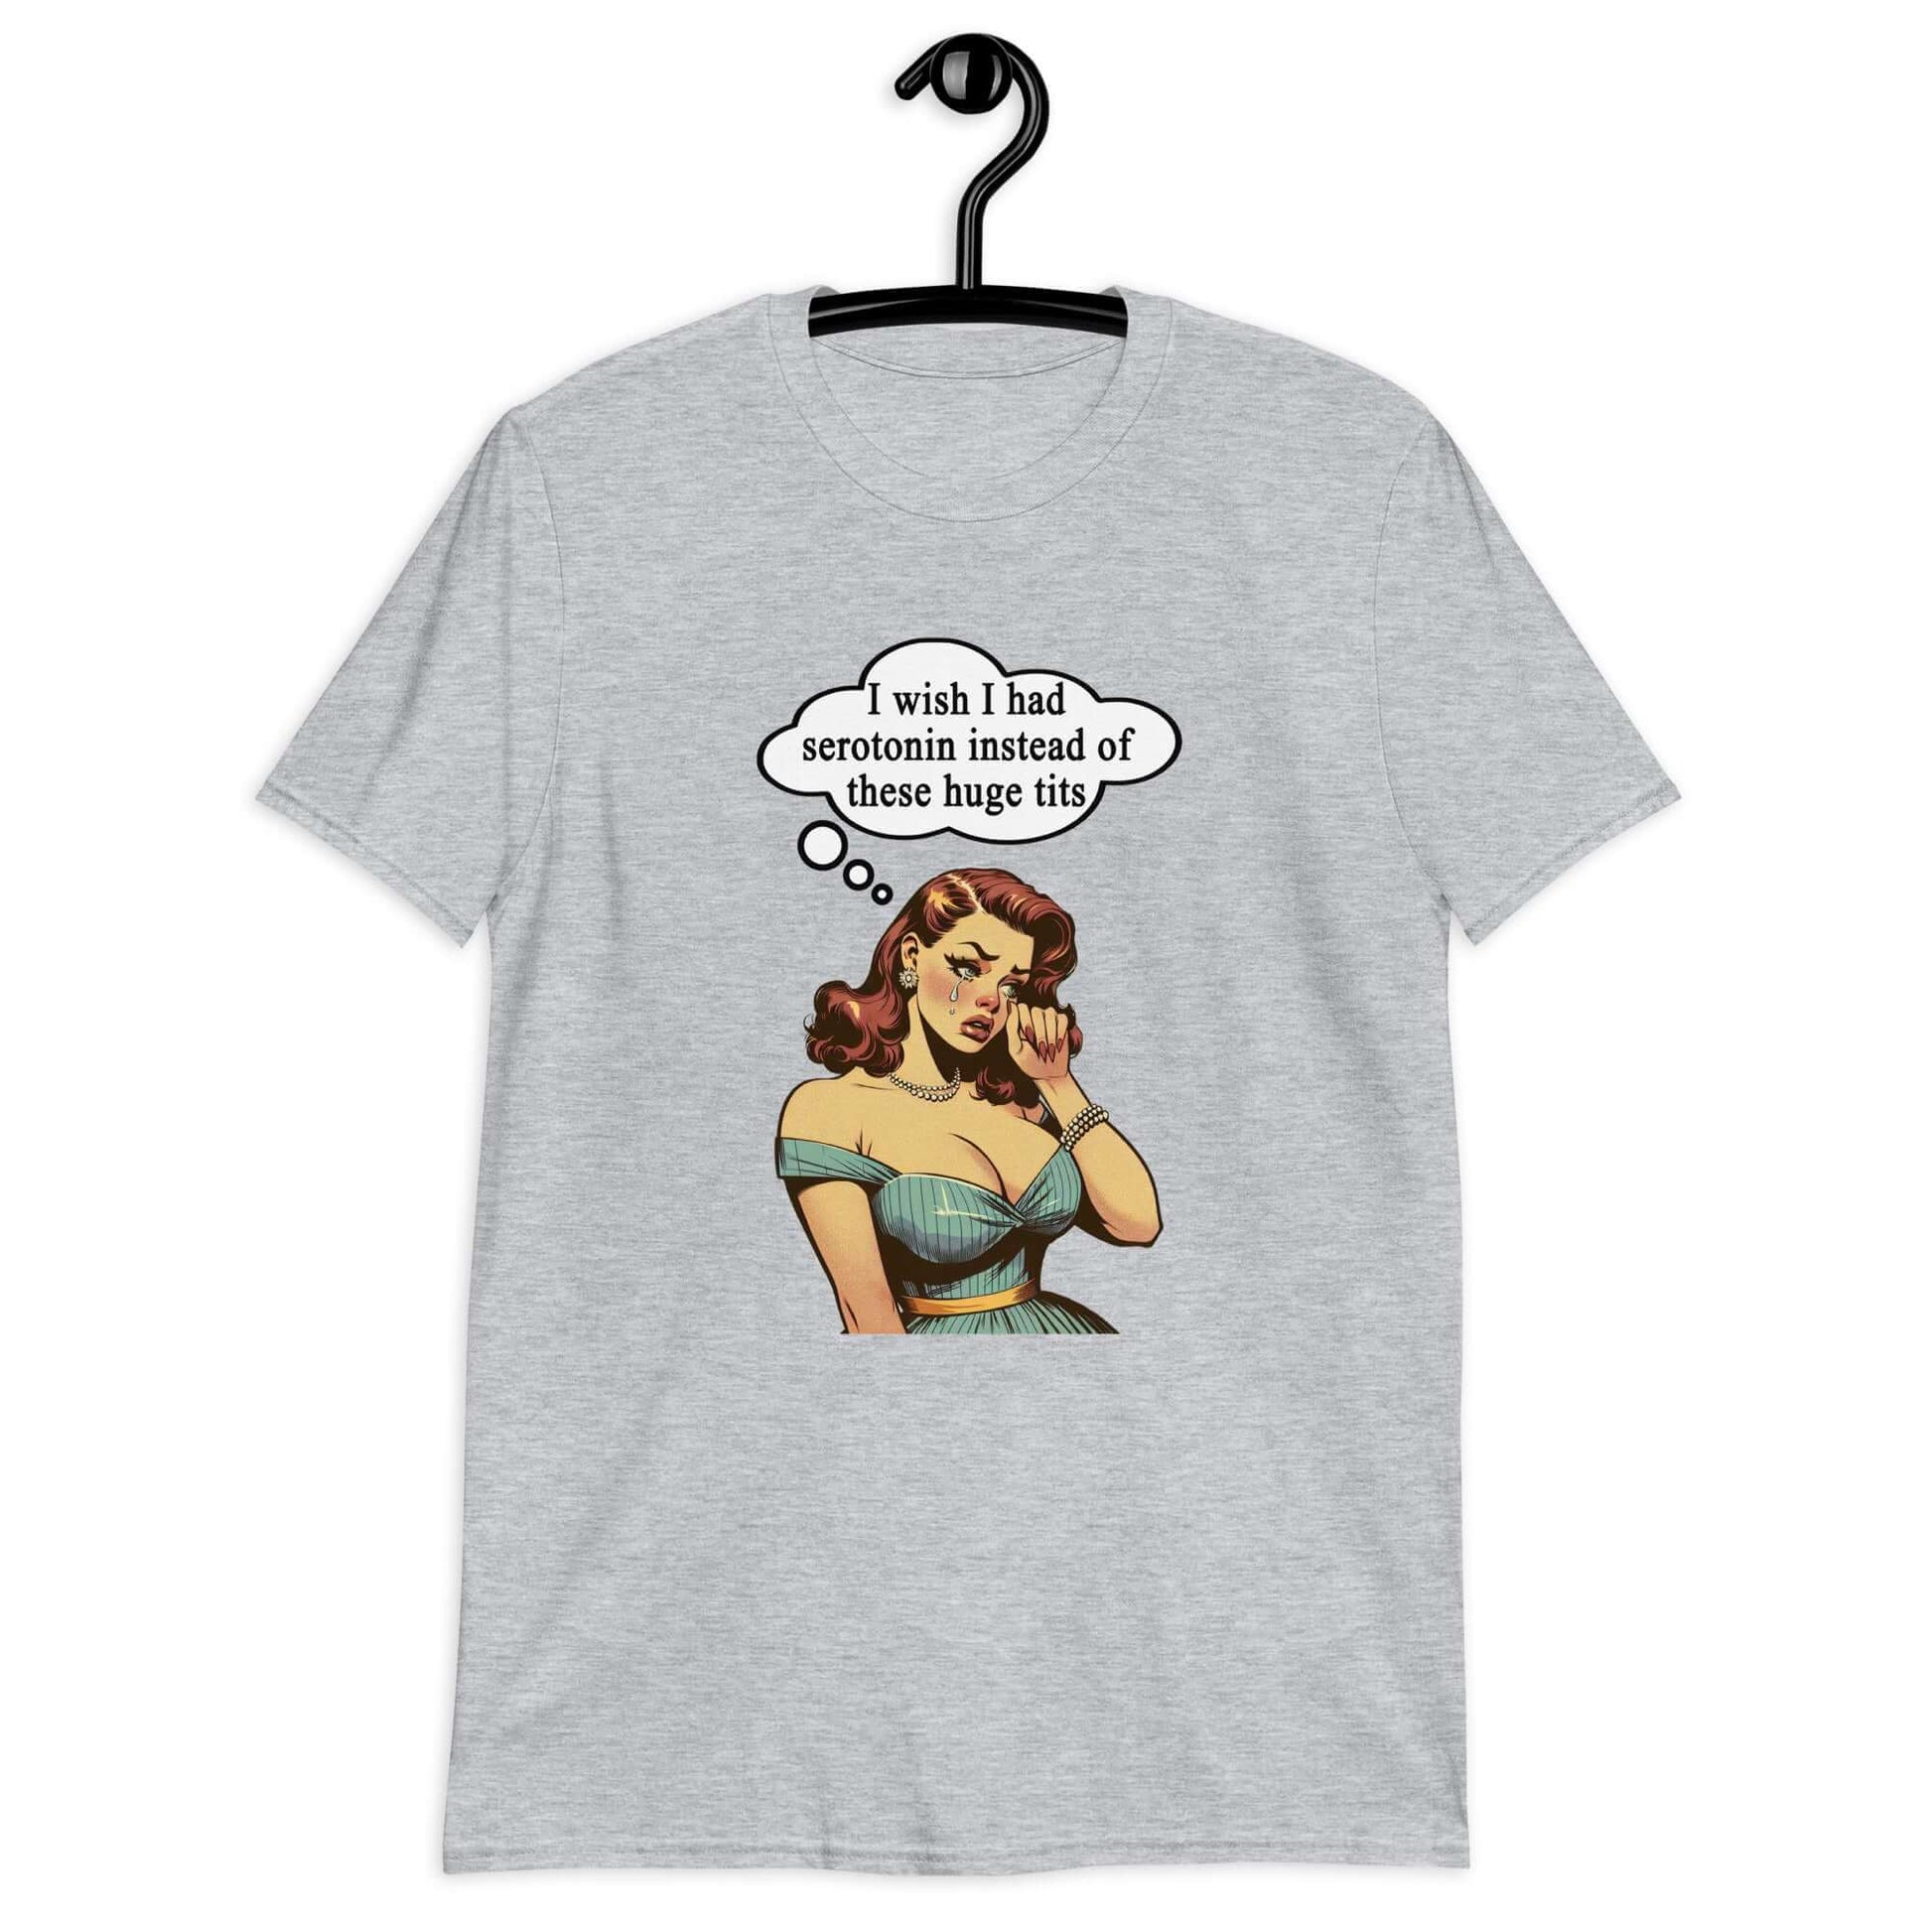 Light heather grey t-shirt with an image of a busty pin-up lady with thought bubble that says I wish I had serotonin instead of these huge tits printed on the front.